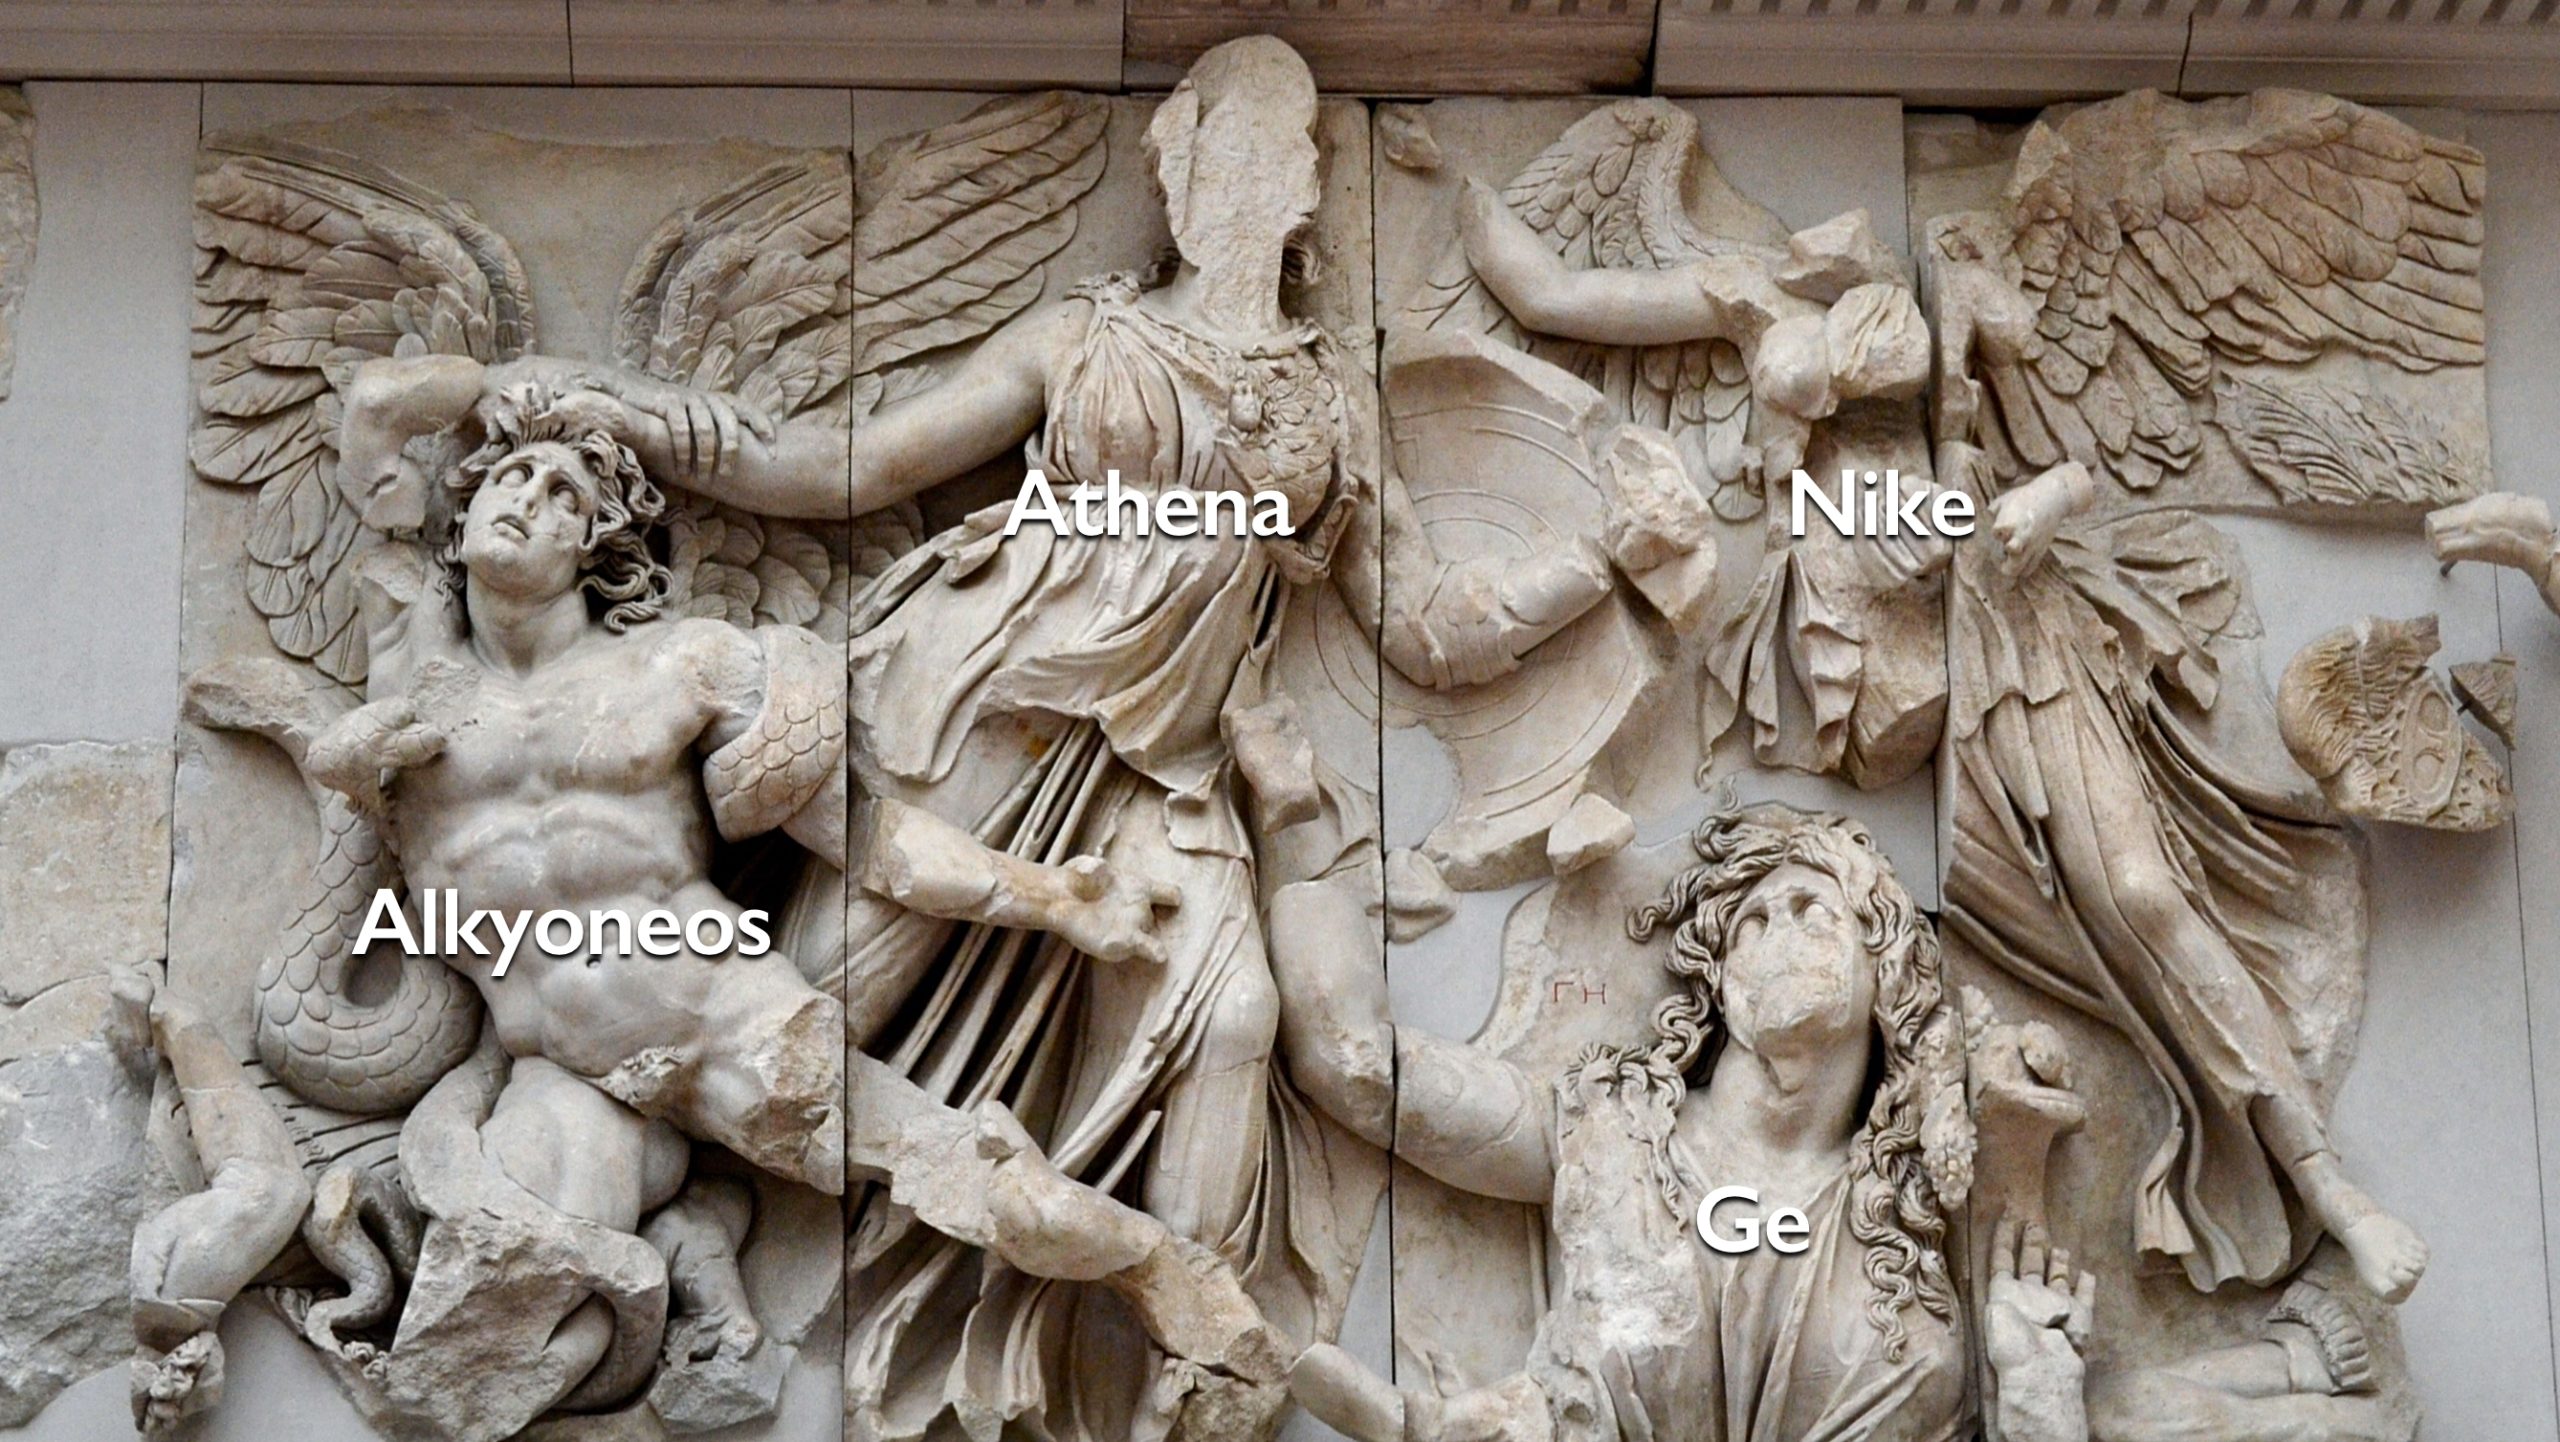 Annotated, Athena panel, east frieze, Pergamon Altar, c. 197-139 B.C.E. (Staatliche Museen, Berlin)